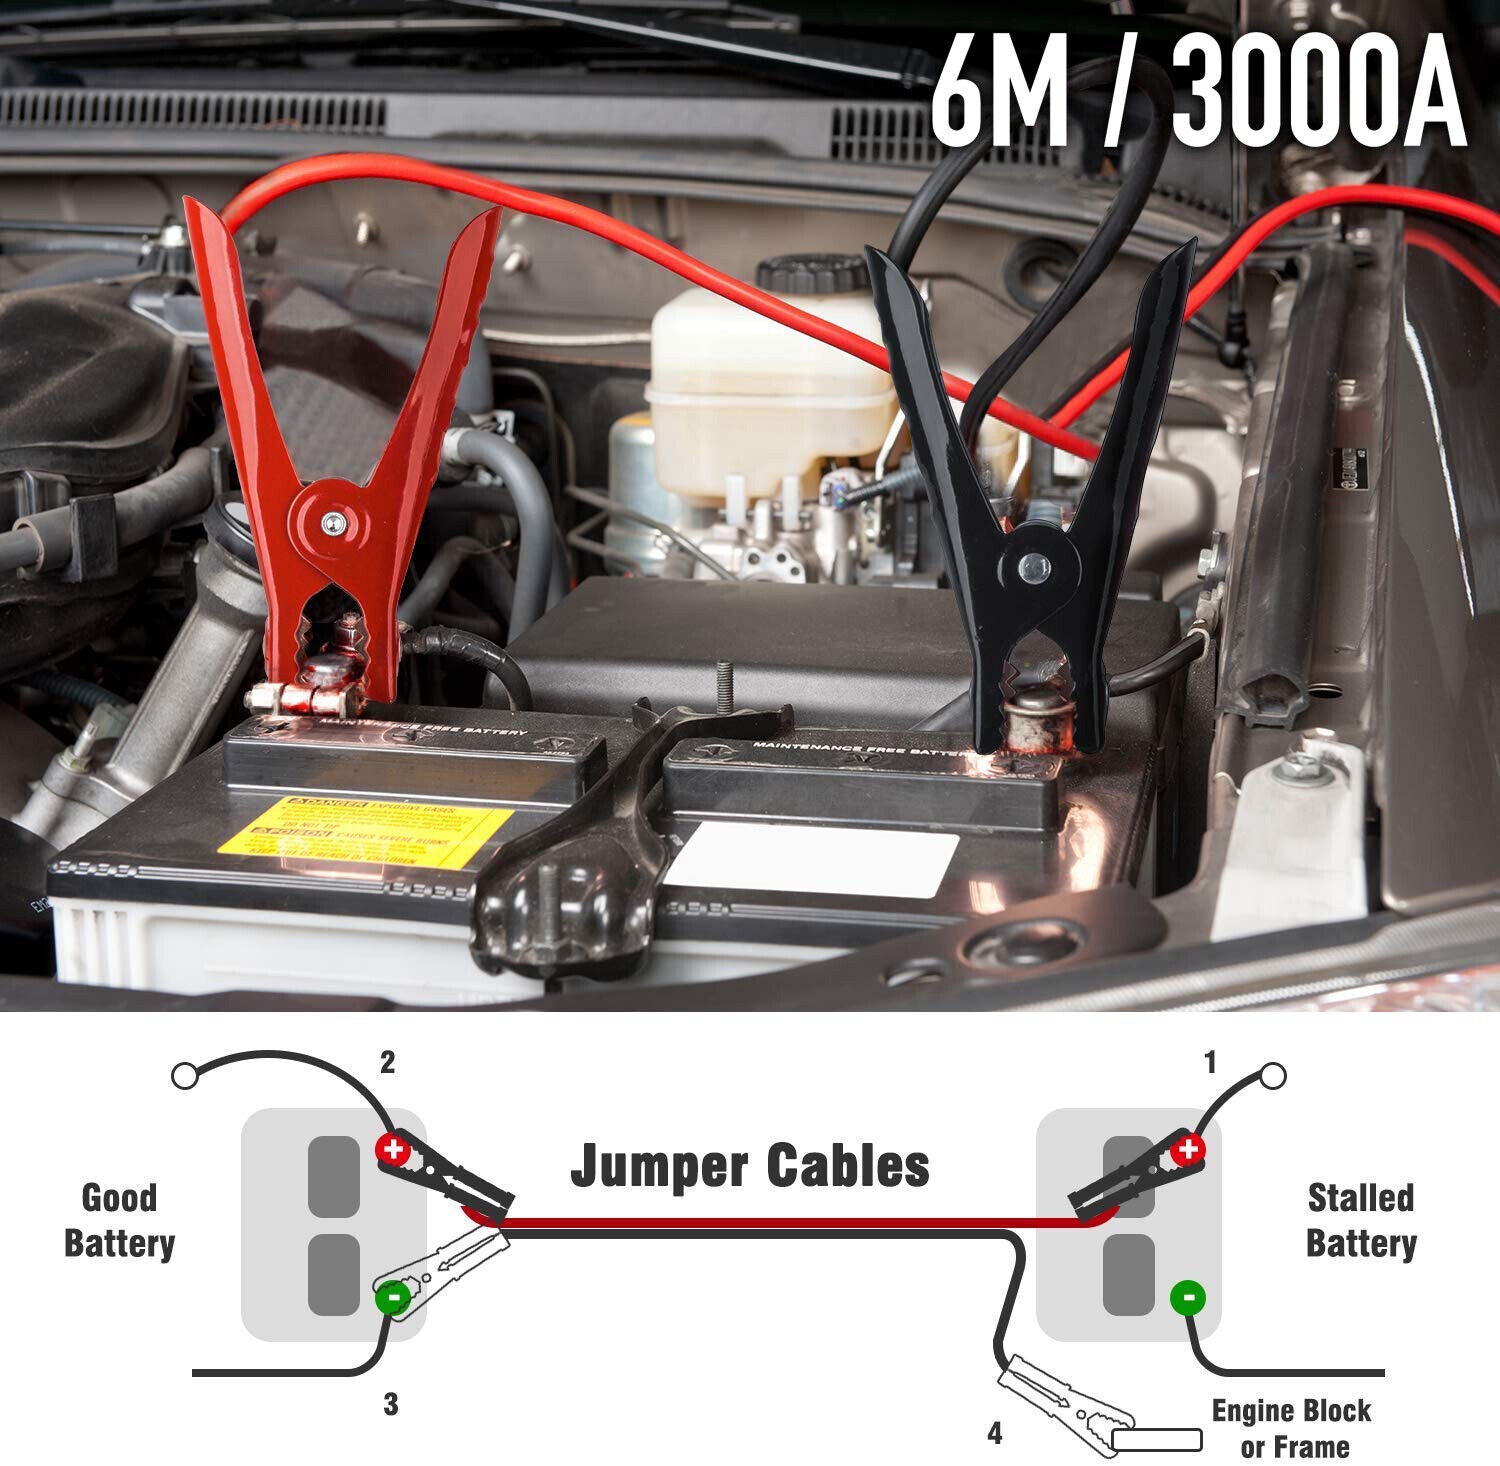 Heavy-duty 6M 3000AMP jumper leads with surge protection and smart alarm indicator for safe and efficient jump-starts.